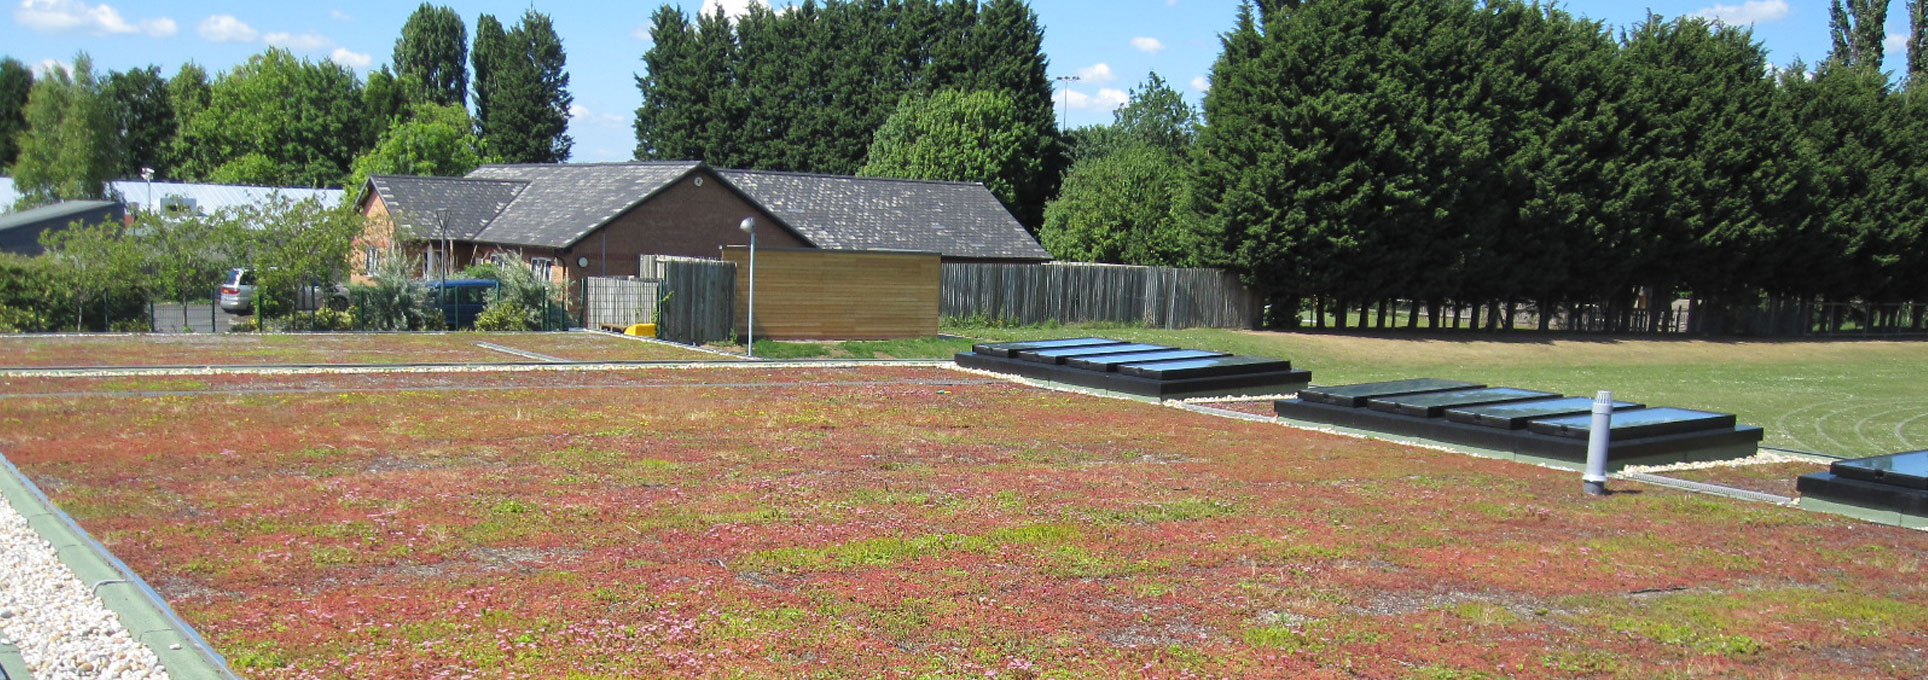 Green-Roof-Home-Page-Slider